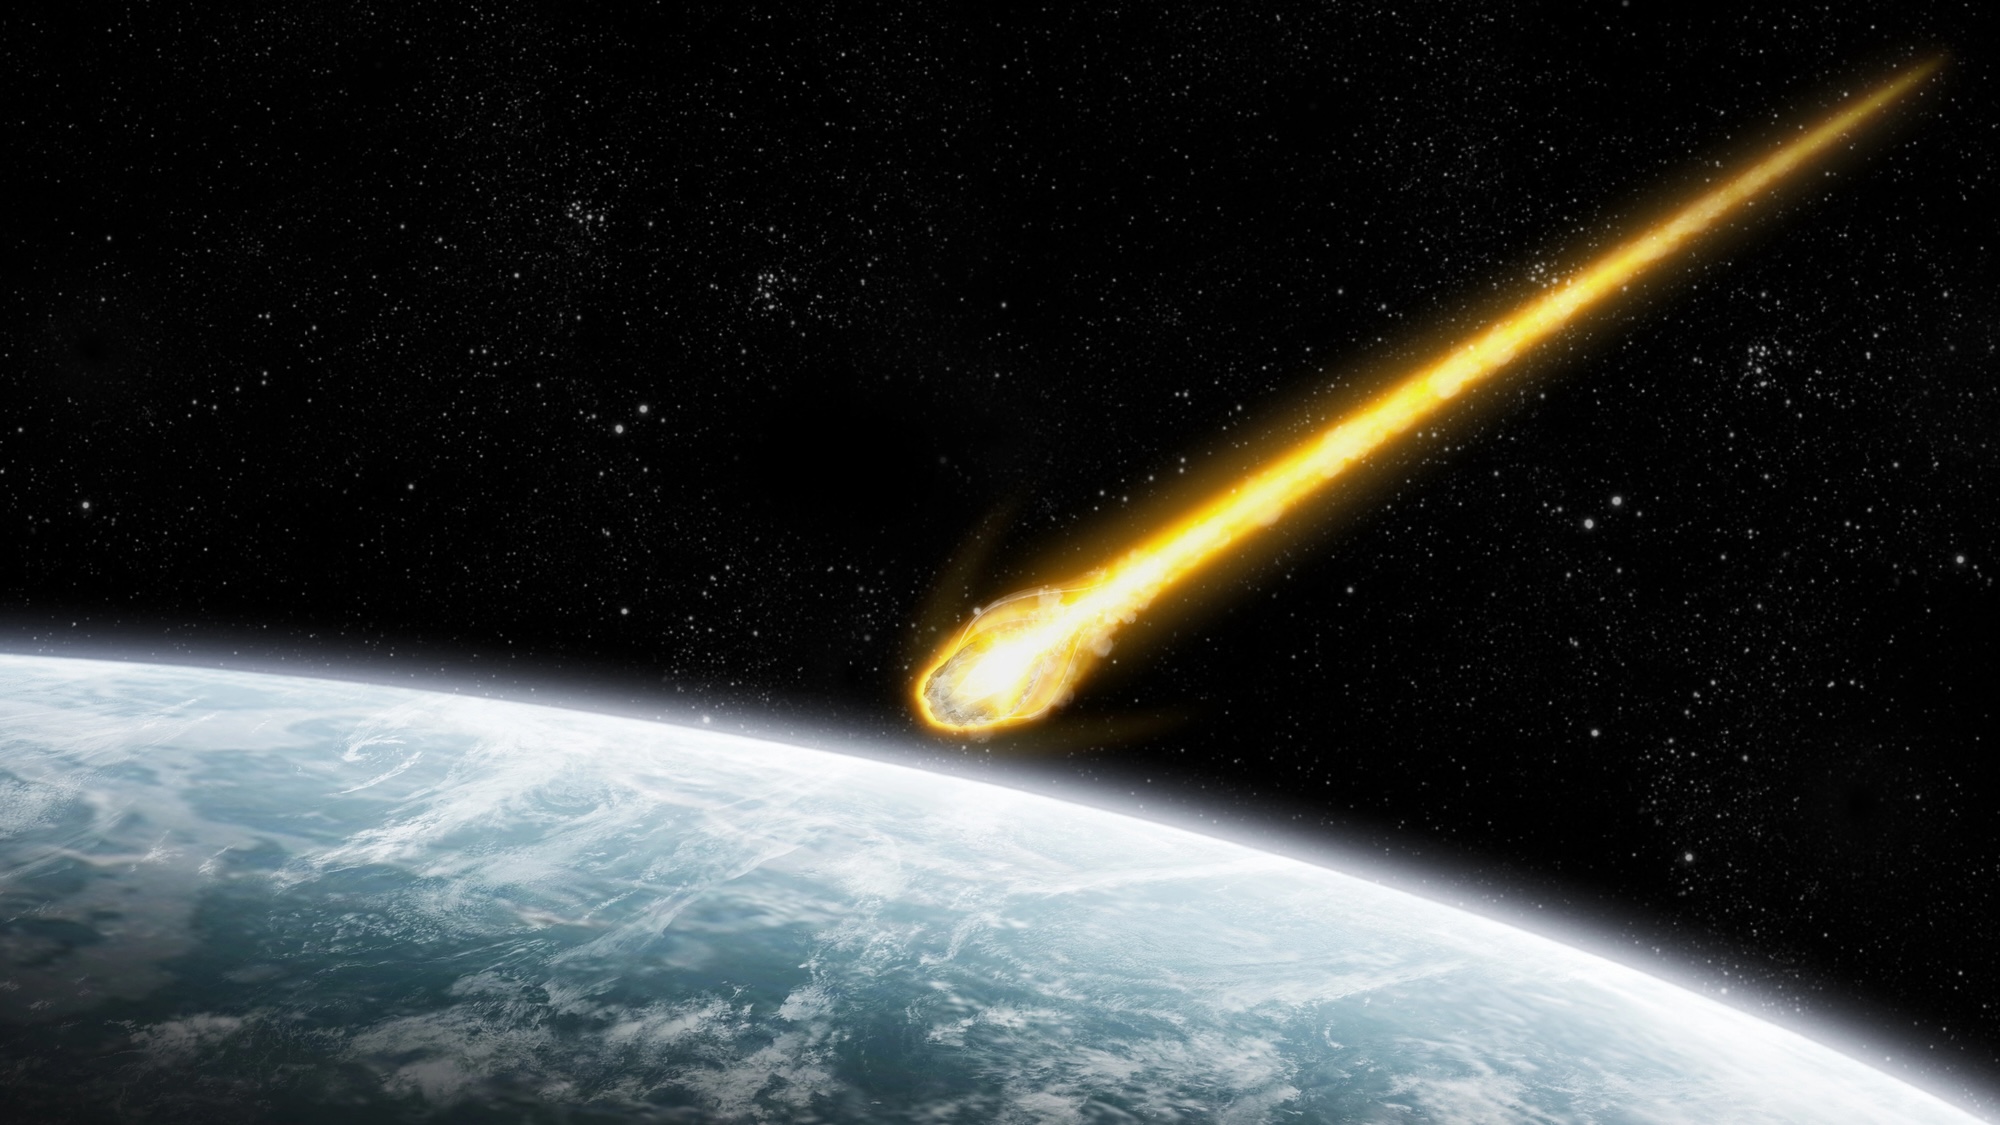 Concept art of asteroid entering planet's atmosphere